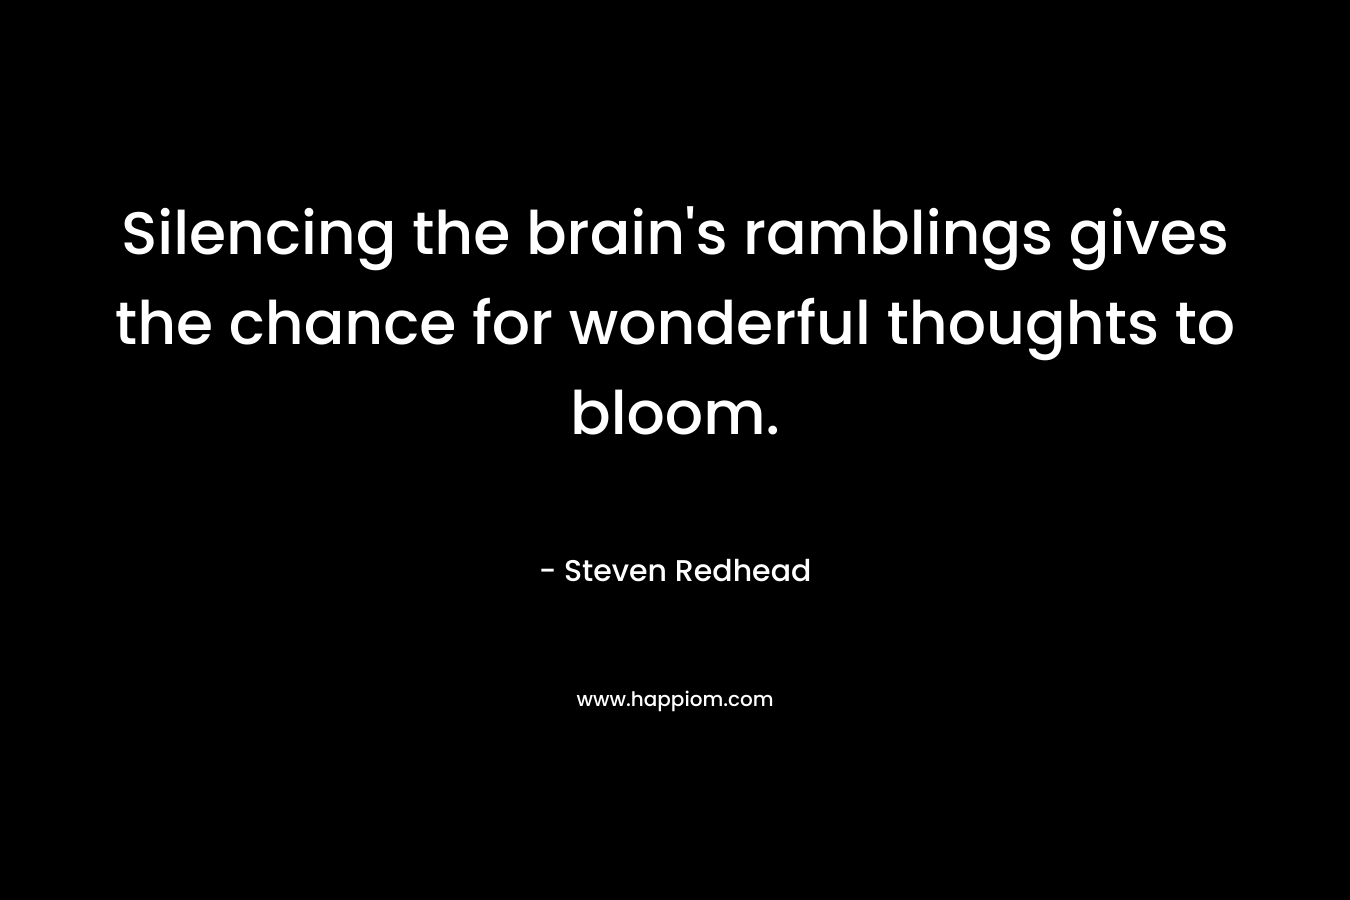 Silencing the brain's ramblings gives the chance for wonderful thoughts to bloom.